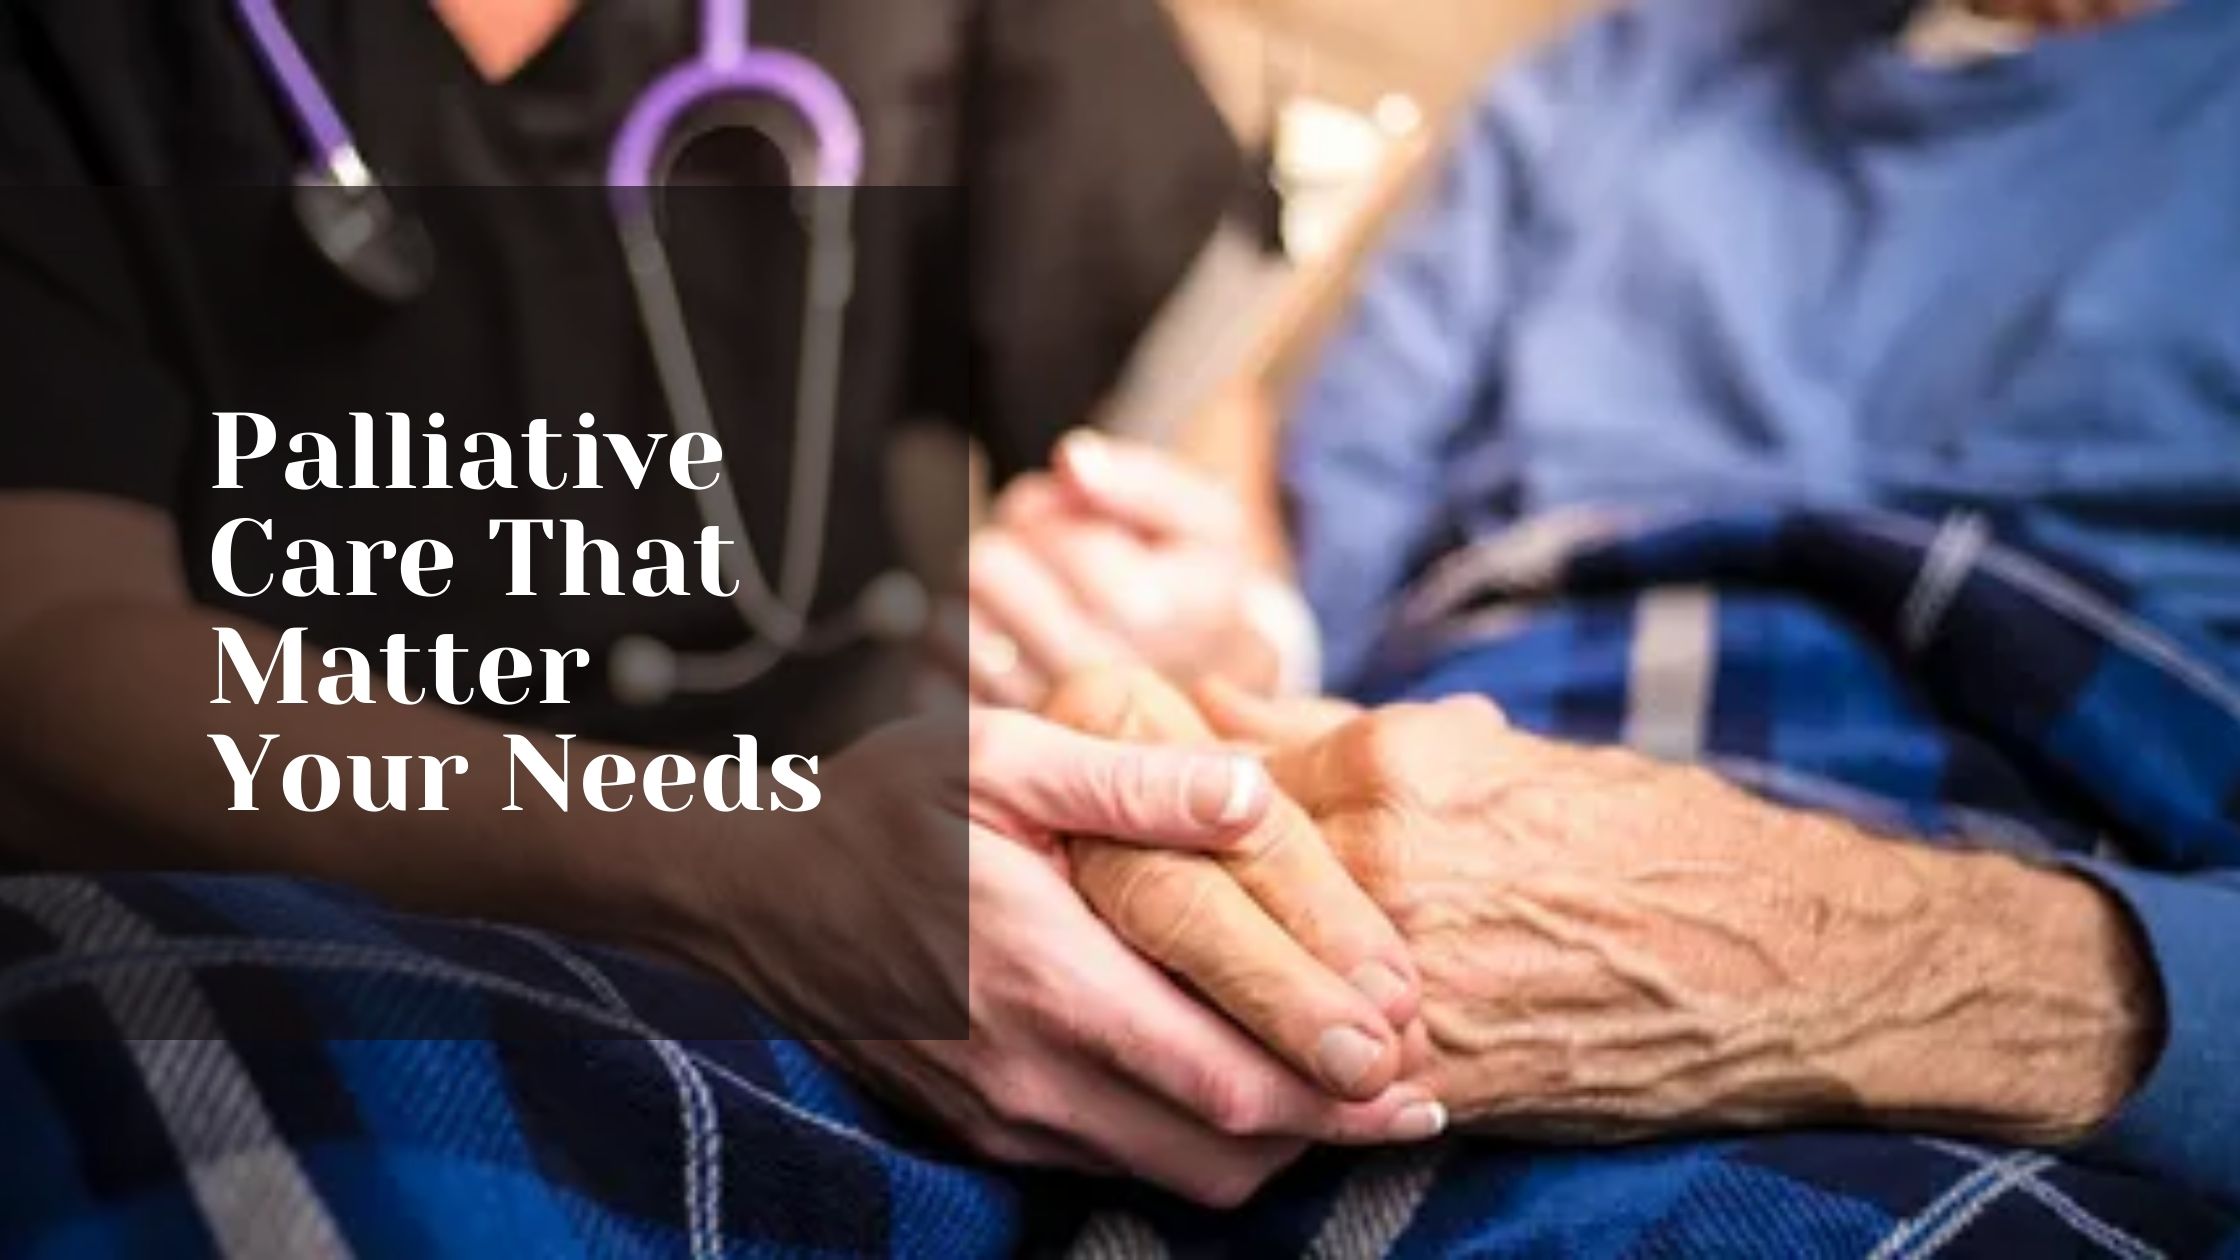 What Questions Should I Ask About Palliative Care That Matter Your Needs?